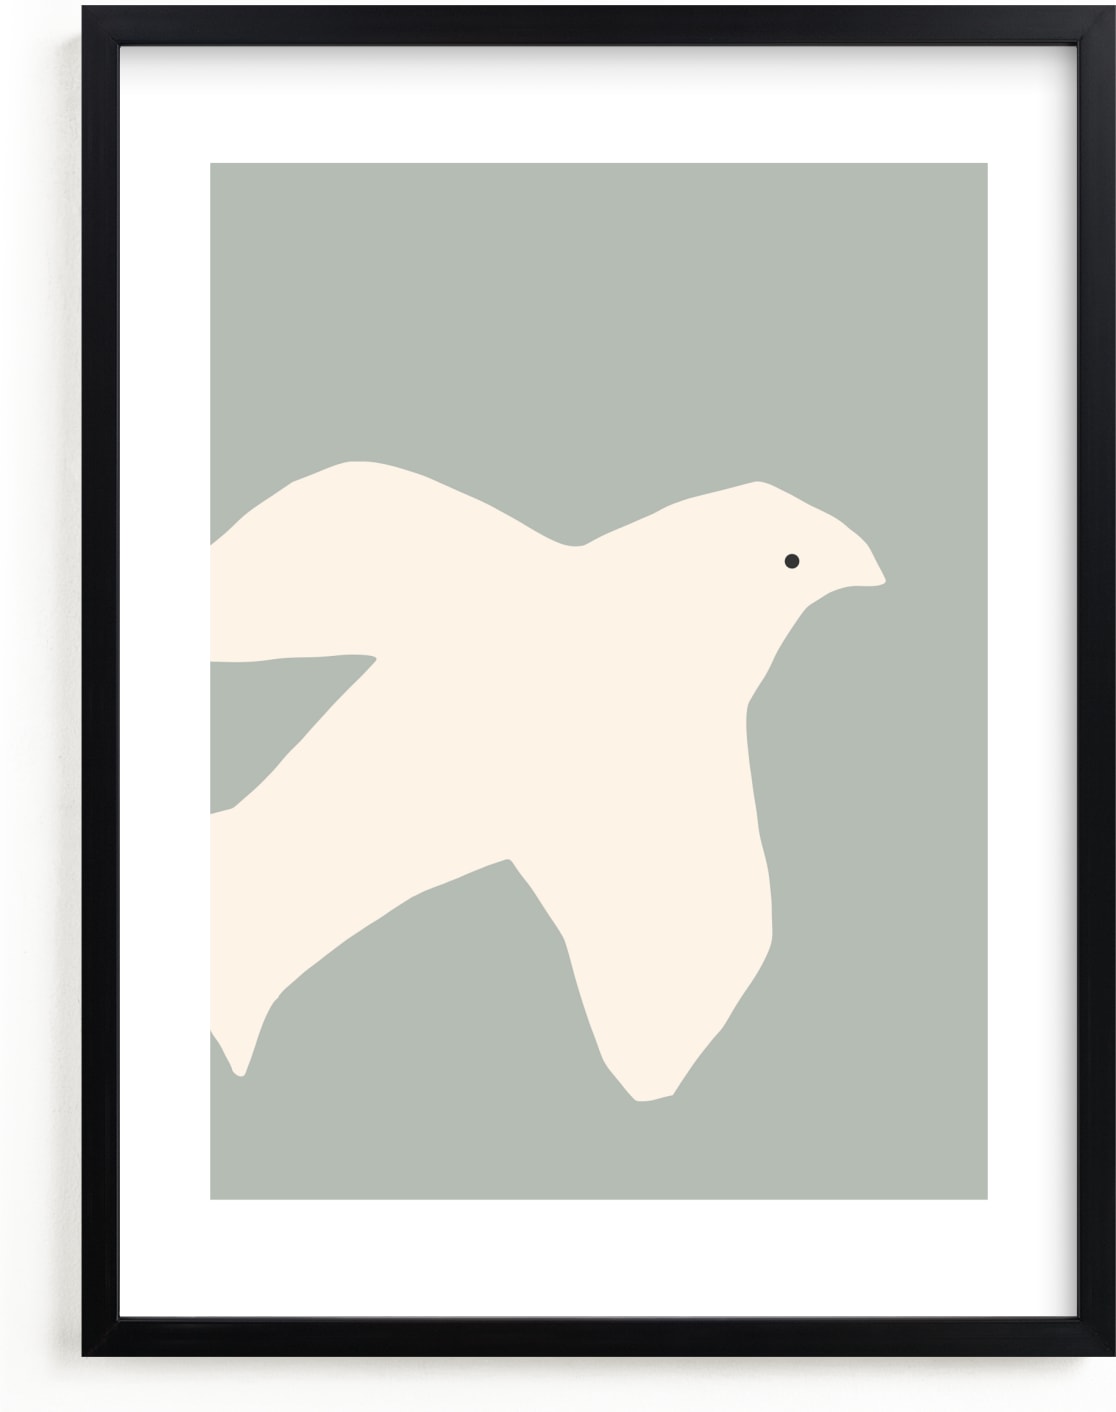 This is a blue nursery wall art by Coit Creative called Summer Dove.